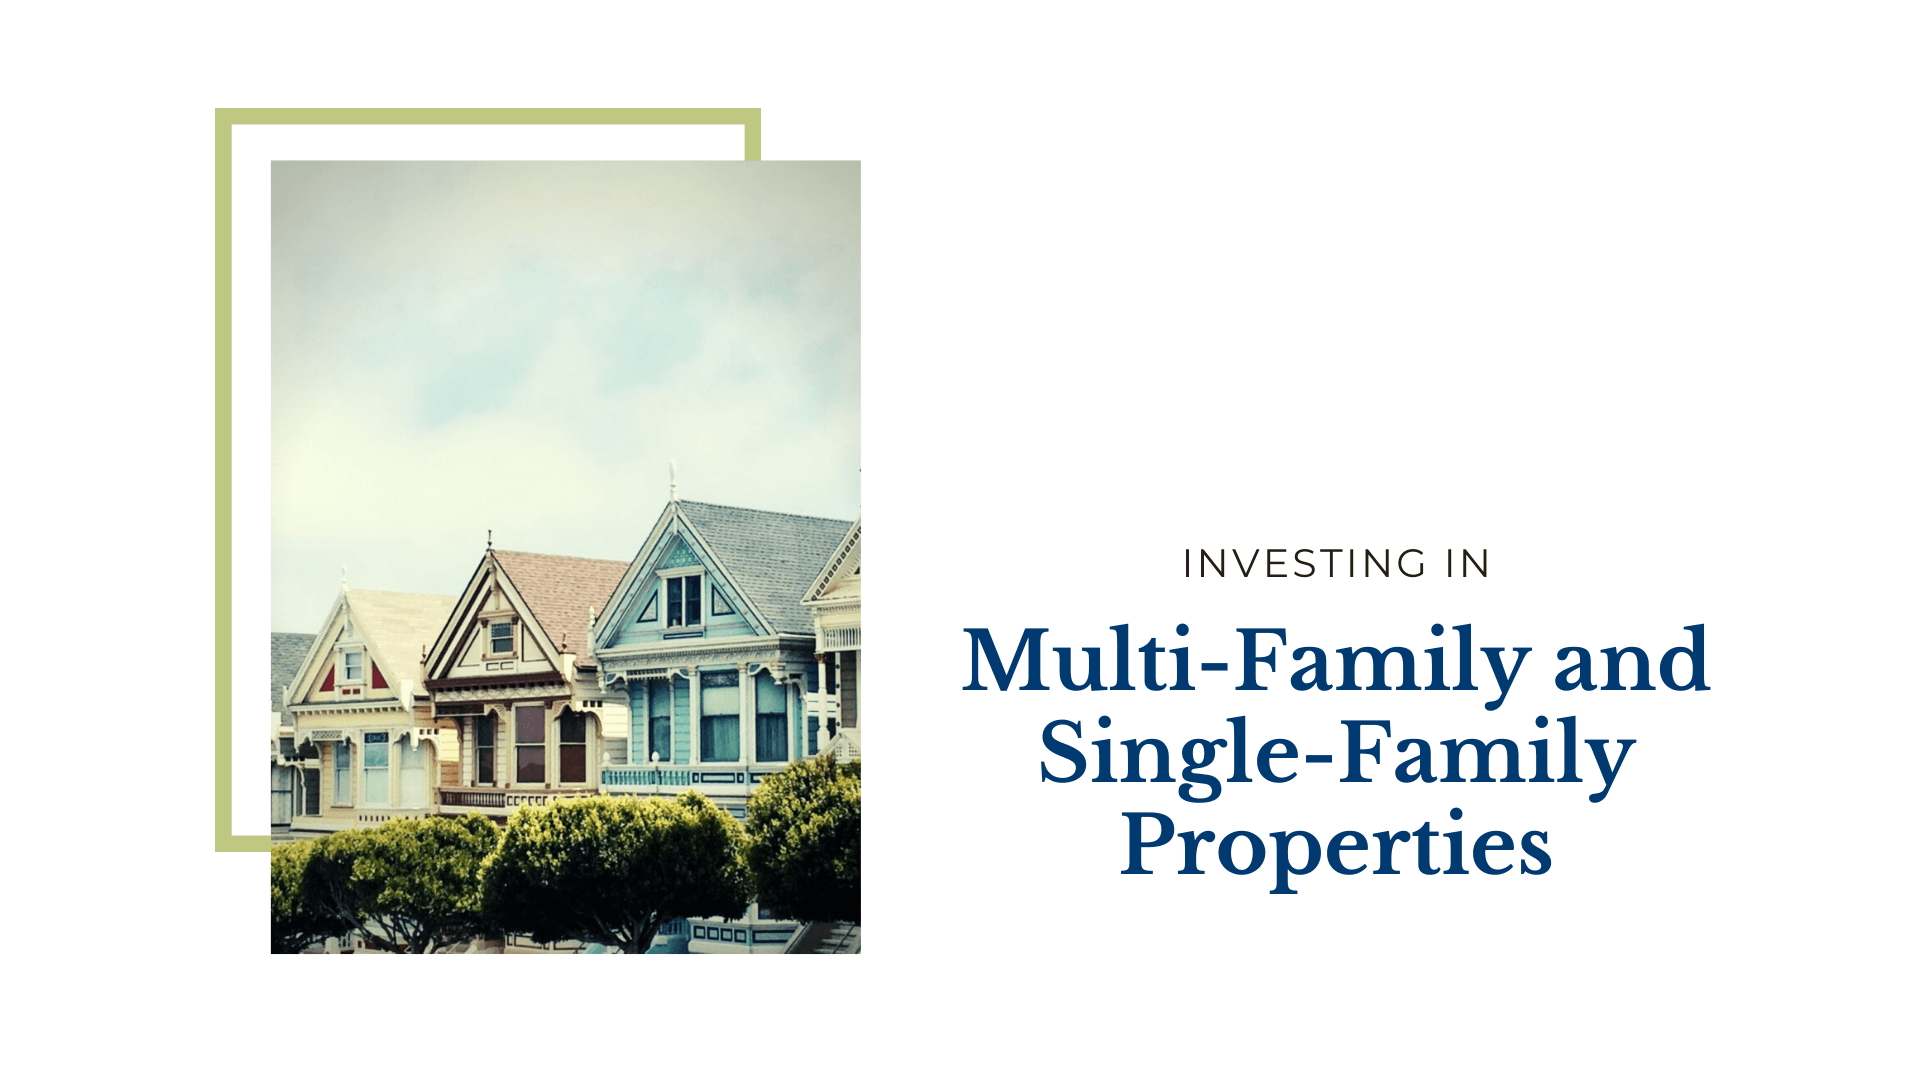 The Benefits of Investing in Both Multi-Family and Single-Family Dayton Properties